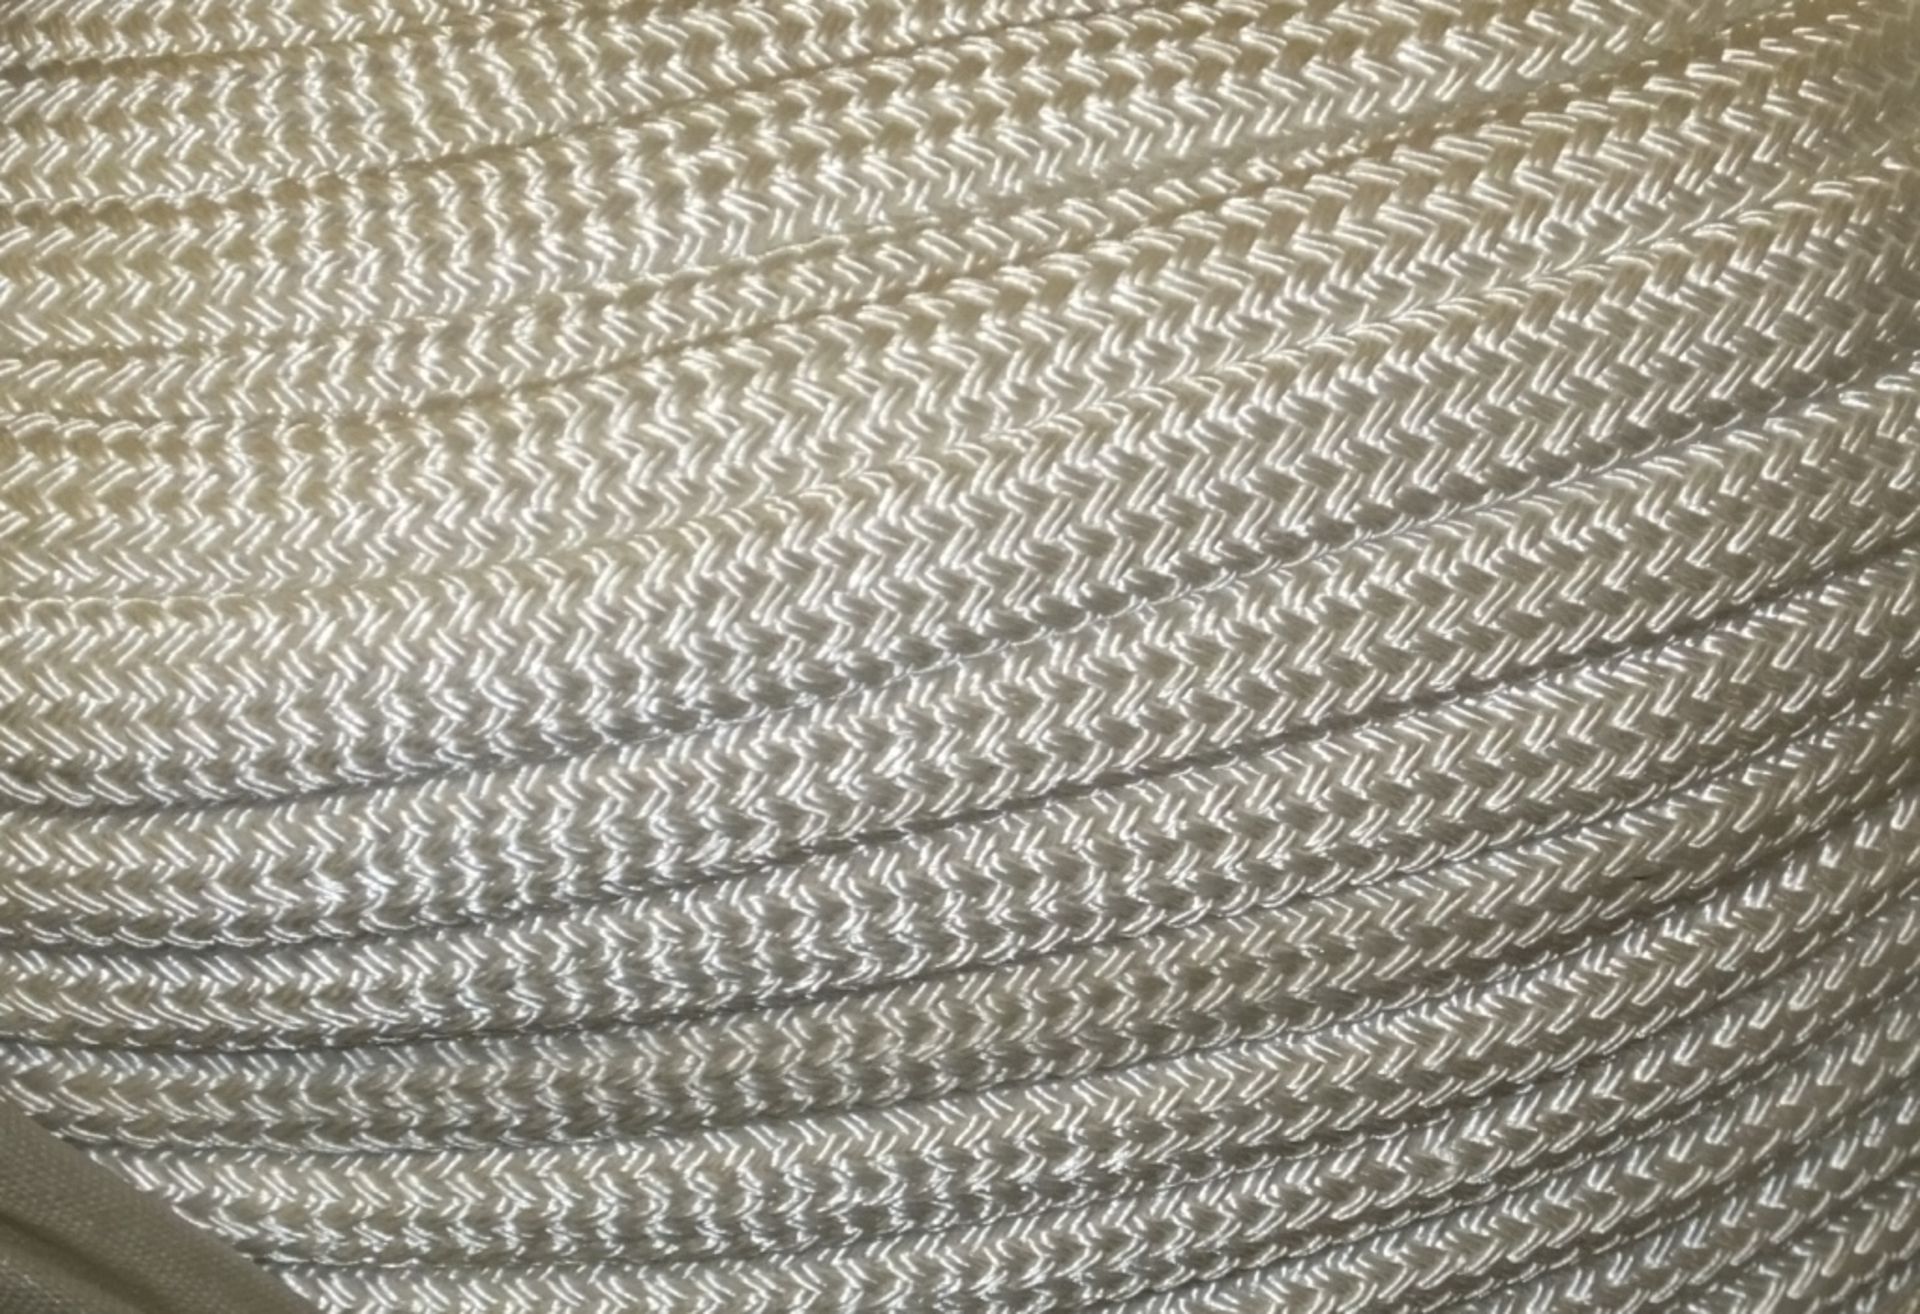 Rope Twisted L 220M x Diameter 21mm - Image 2 of 2